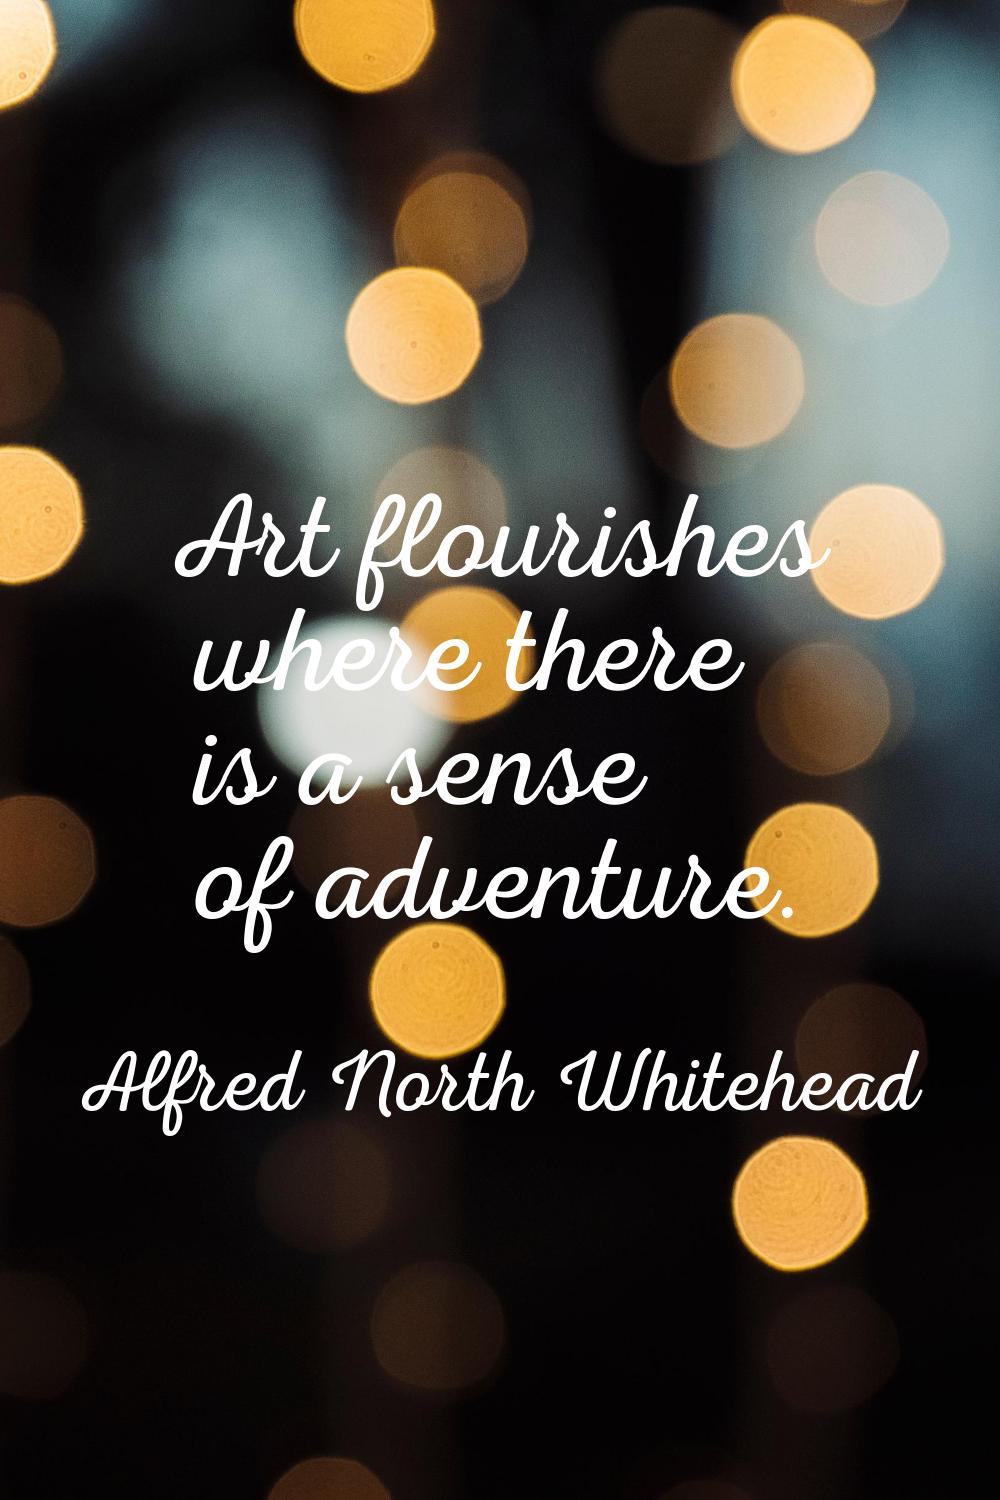 Art flourishes where there is a sense of adventure.